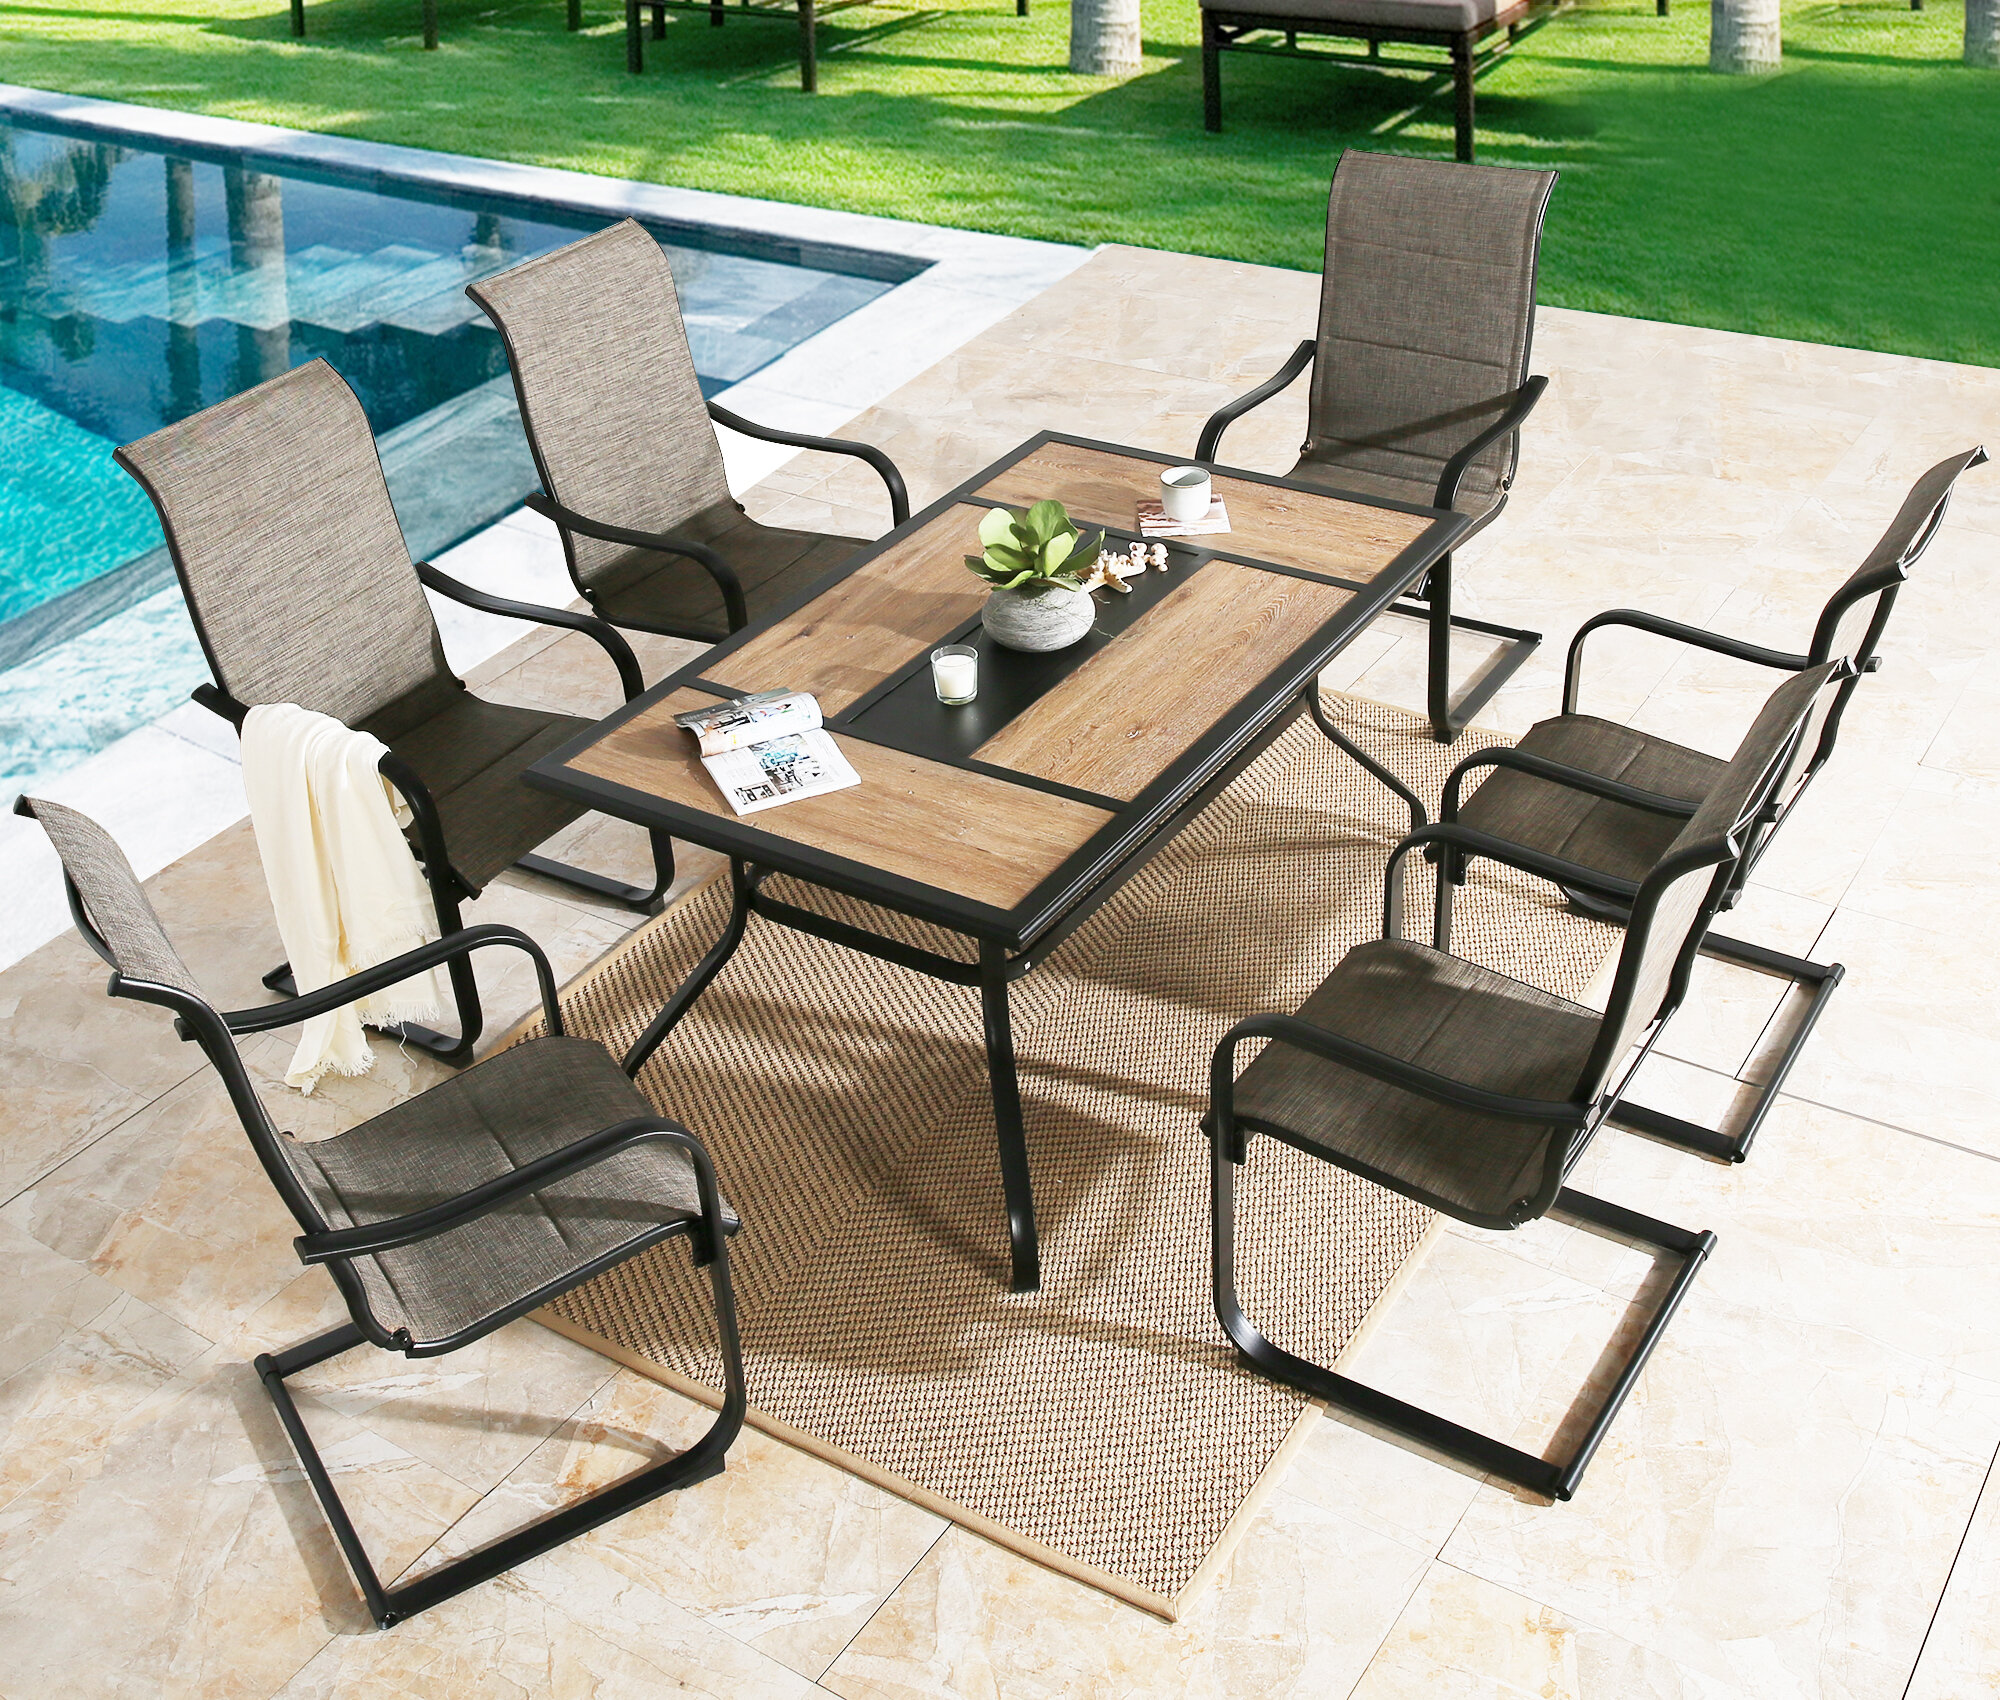 Hampton Bay 21 in. x 23.5 in. Outdoor High Back Dining Chair